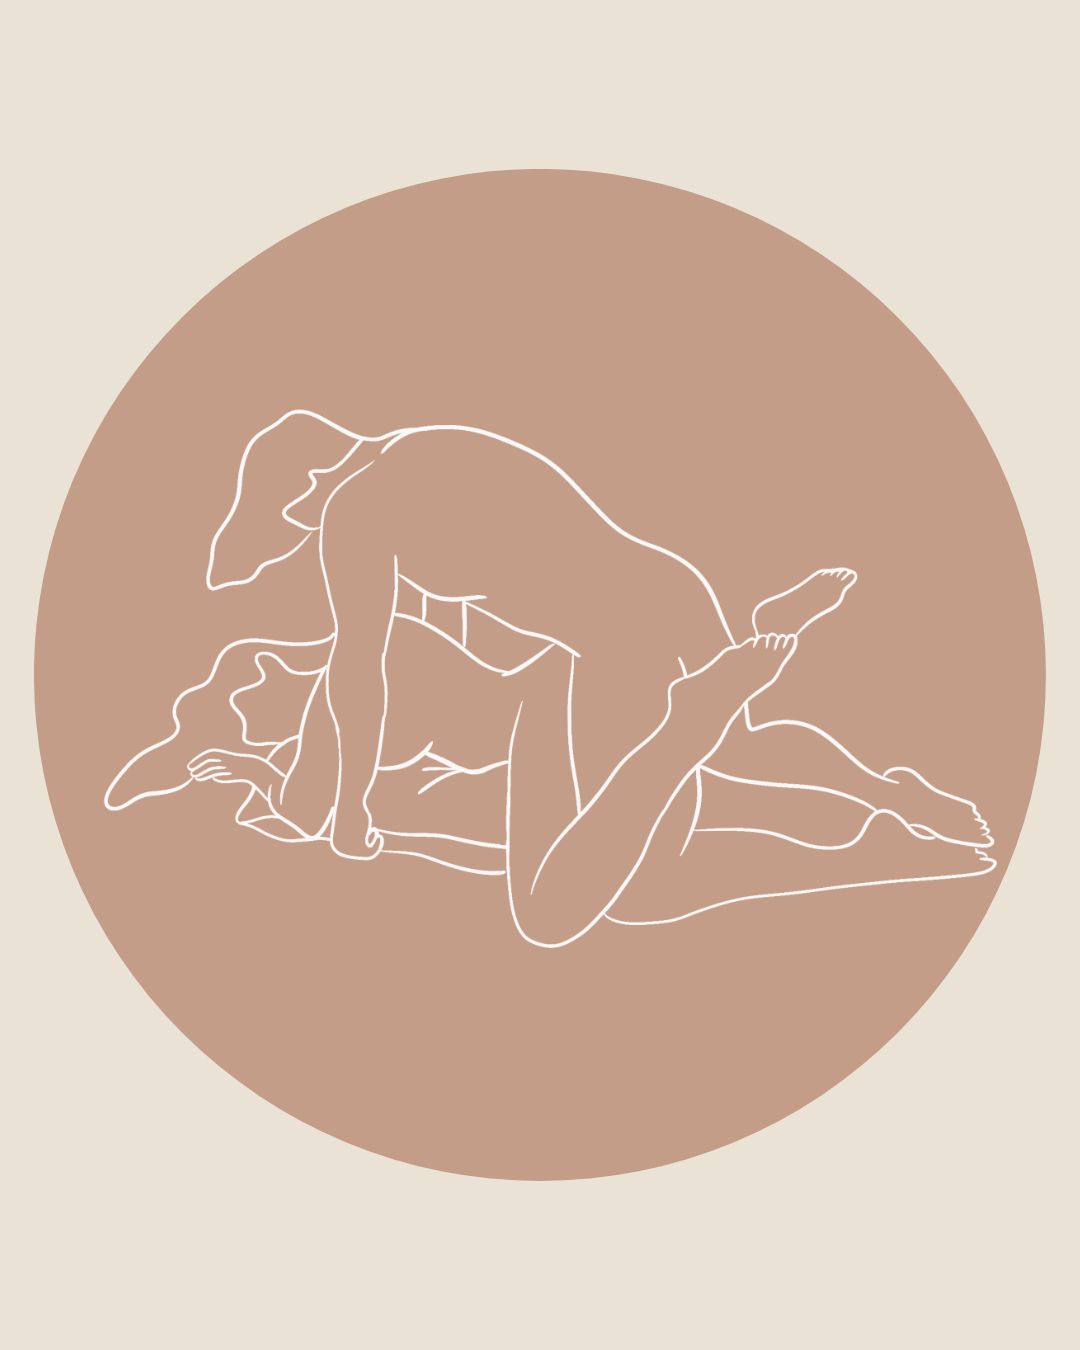 Illustration of speed bump sex position in a brown circle on tan background